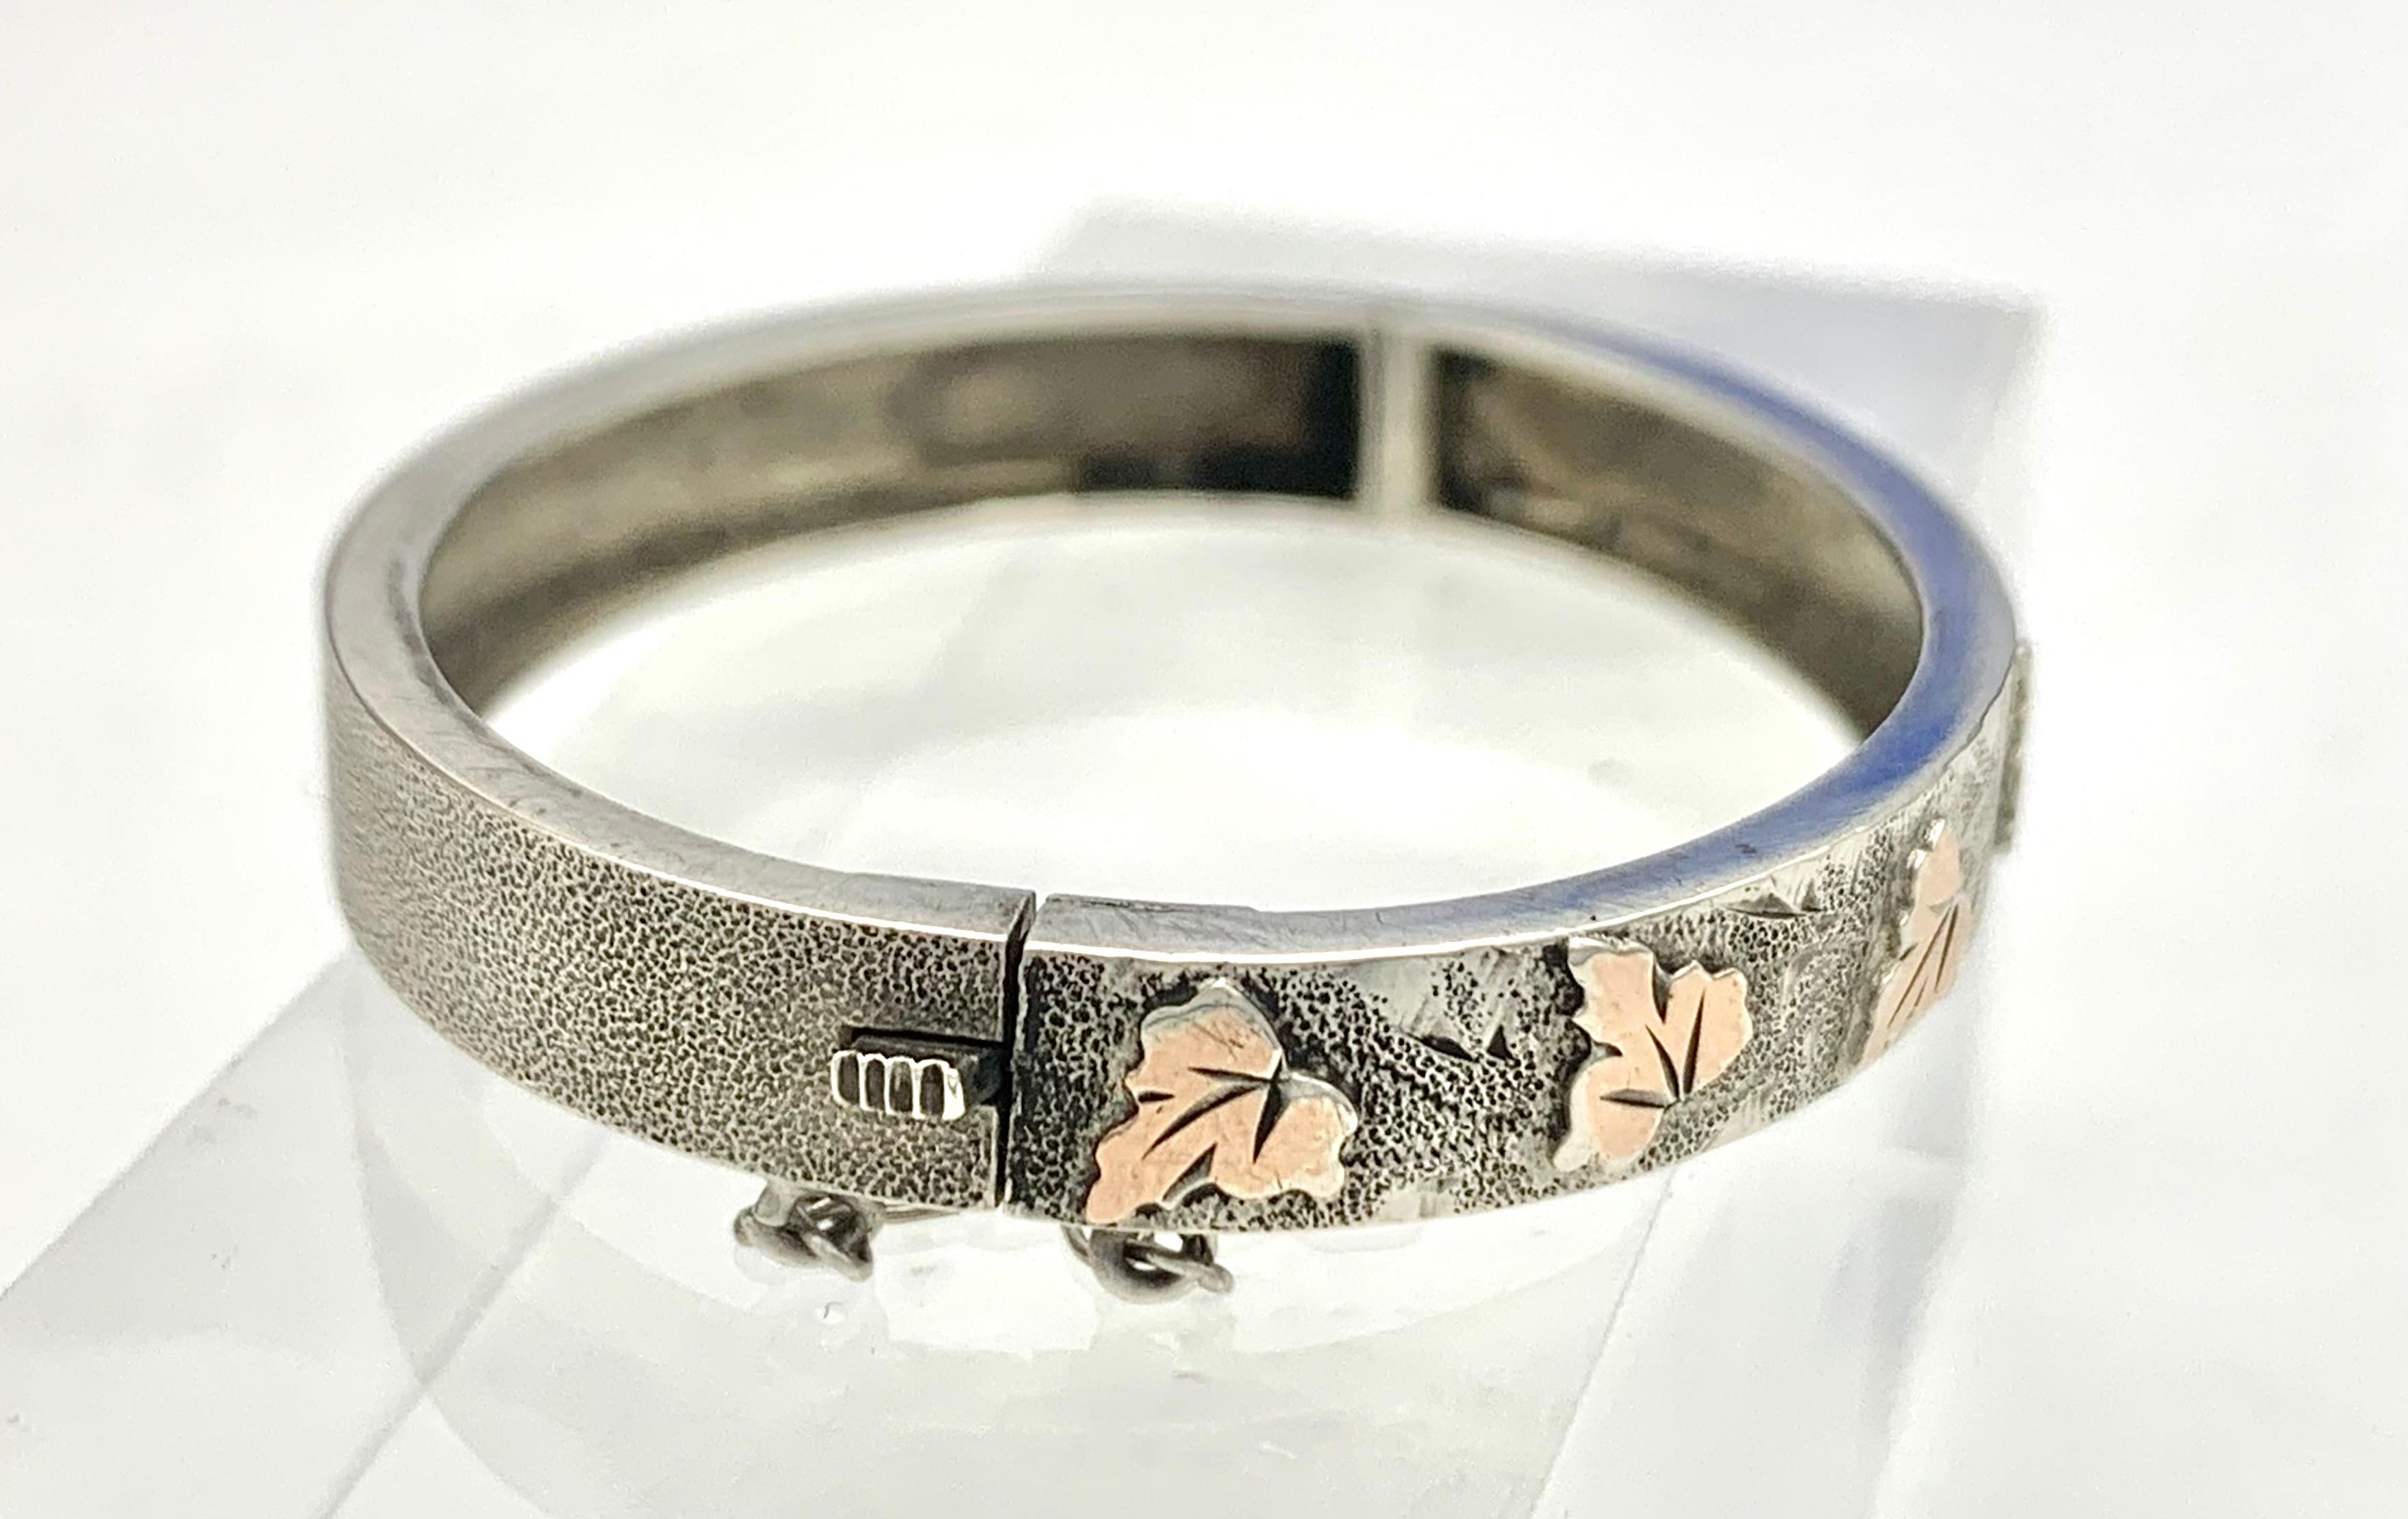 This charming tiny silver bracelet was intended for a newly born child or a doll It was made in France in the 1880' and is fully hallmarked on the tongue of the clasp. The bracelet is finely chiseled and engraved and decorated with raised vine